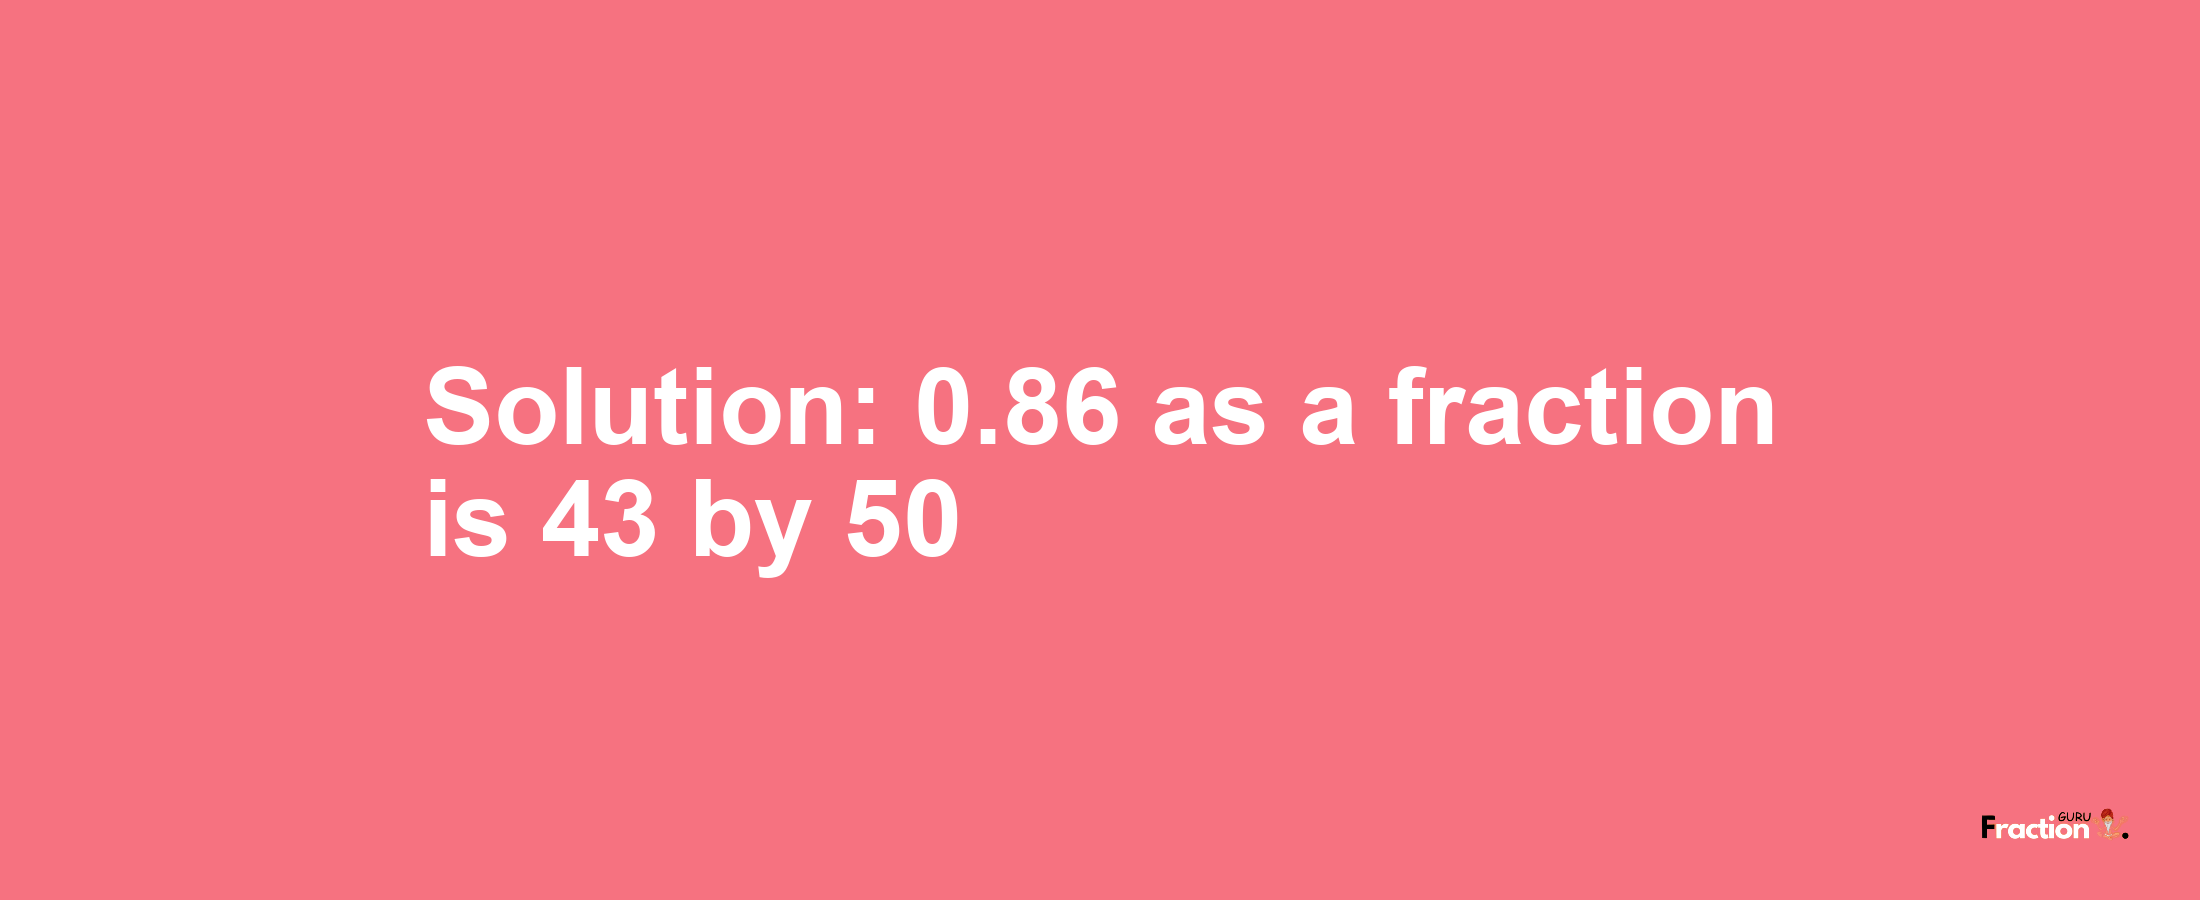 Solution:0.86 as a fraction is 43/50